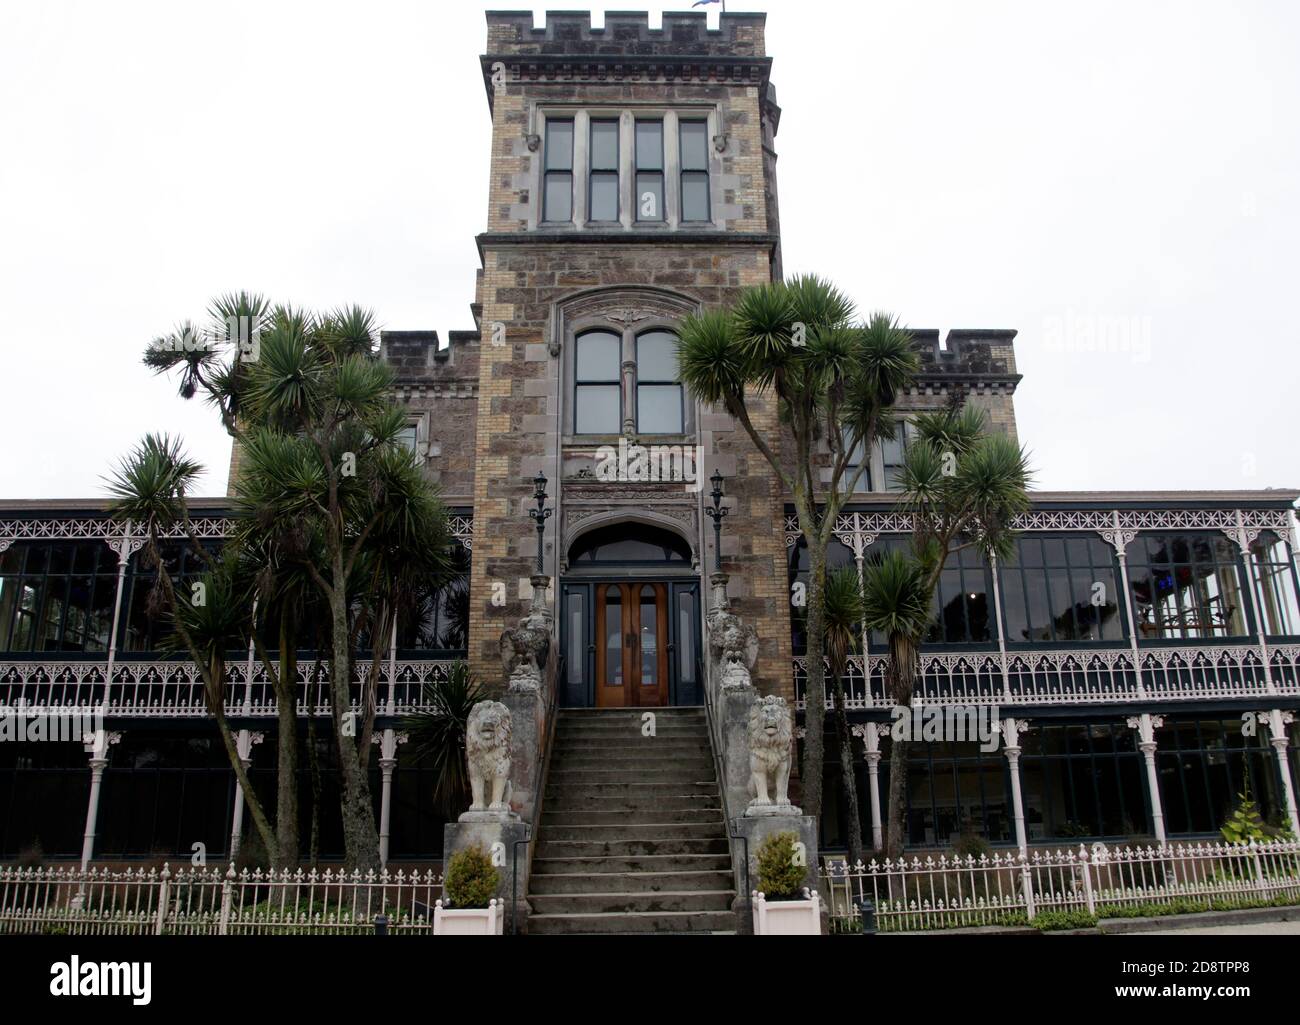 Larnach Castle is seen in Dunedin on the Otago Peninsula, south Island, New Zealand March 11, 2020. Photograph John Voos Stock Photo